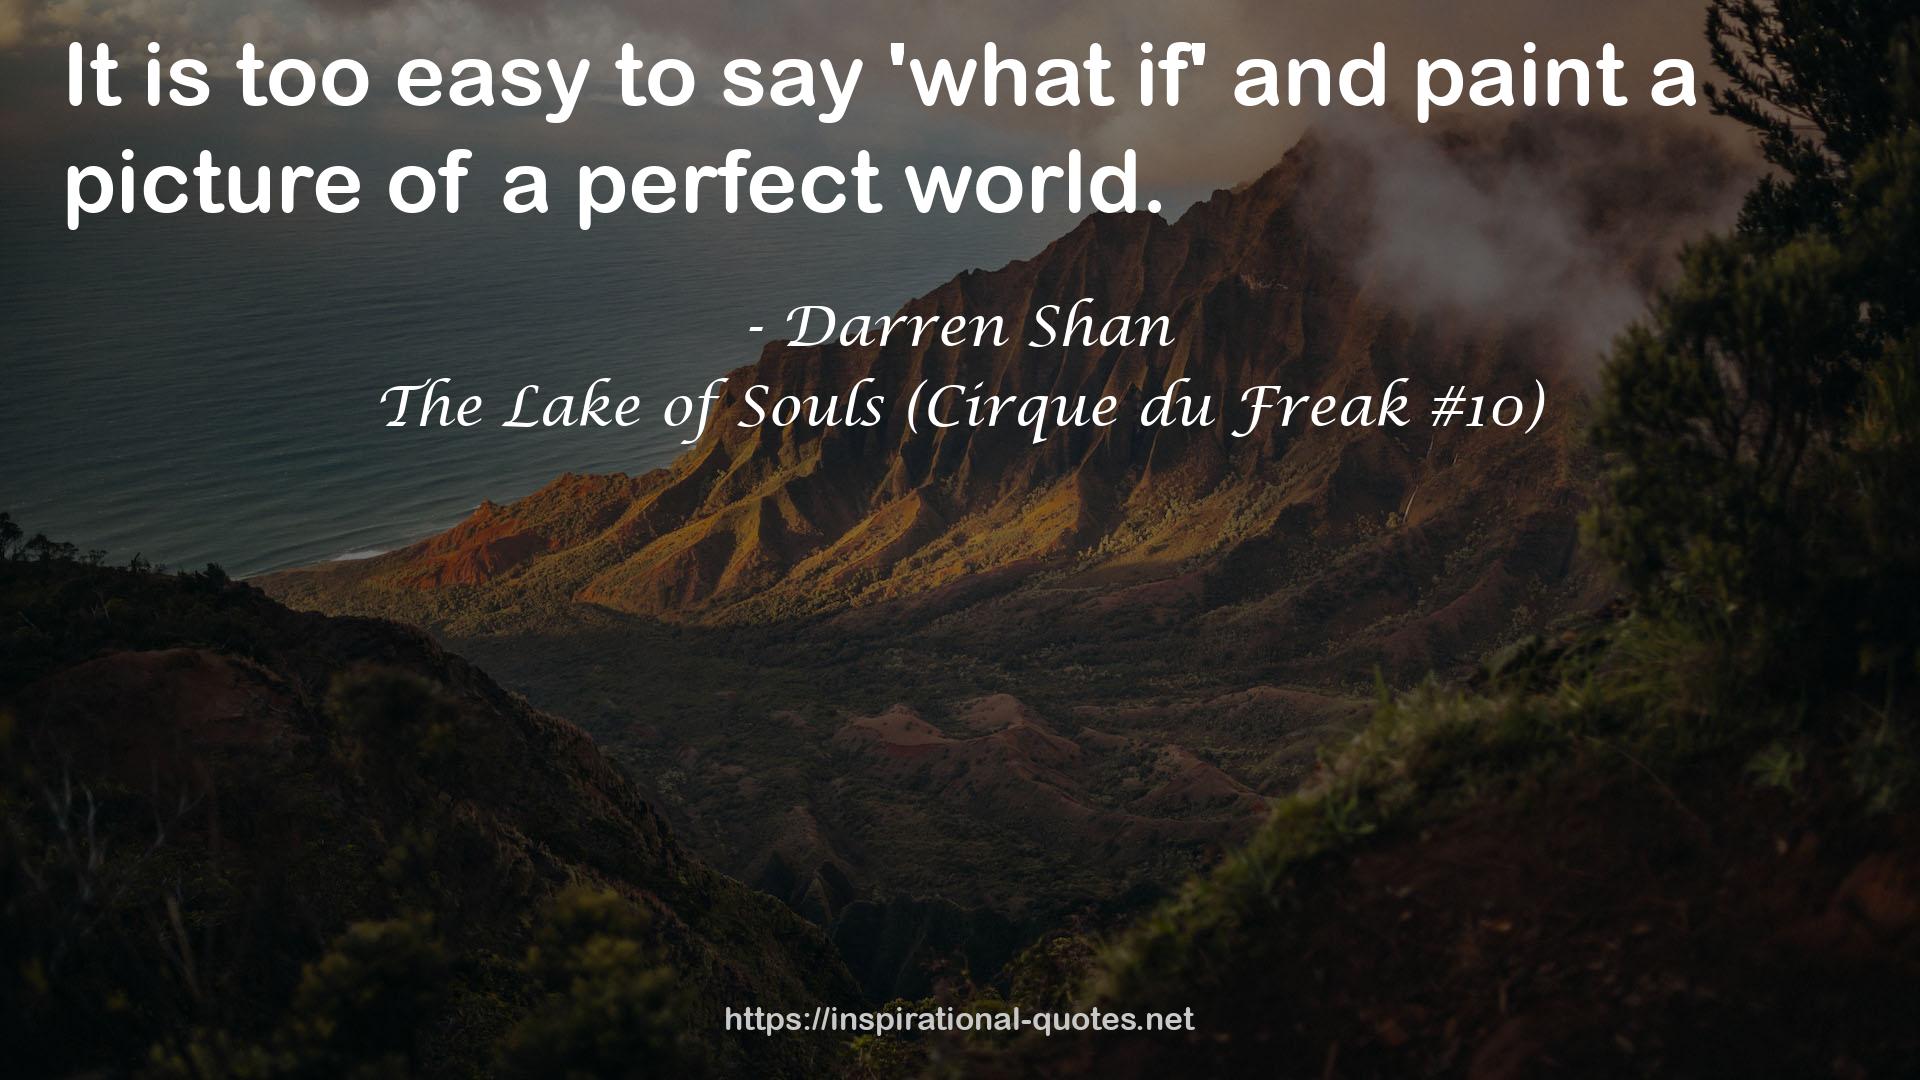 The Lake of Souls (Cirque du Freak #10) QUOTES